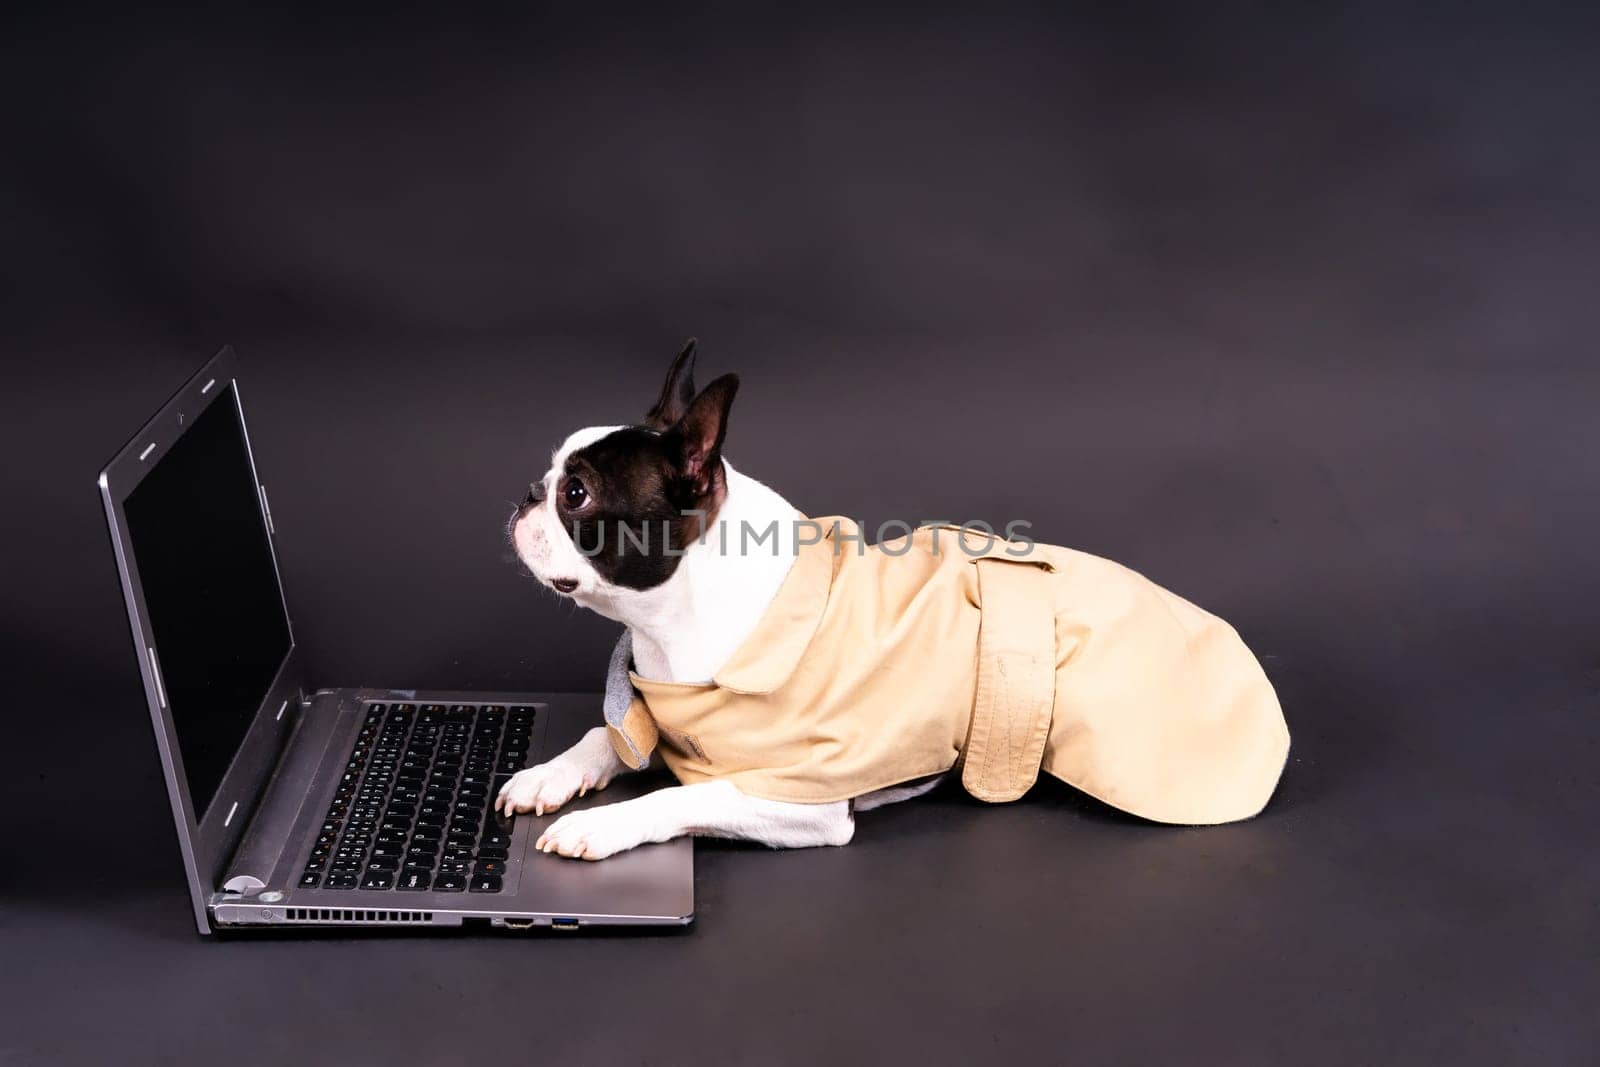 The dog uses laptop. Boston terrier looks at something, communicates with someone